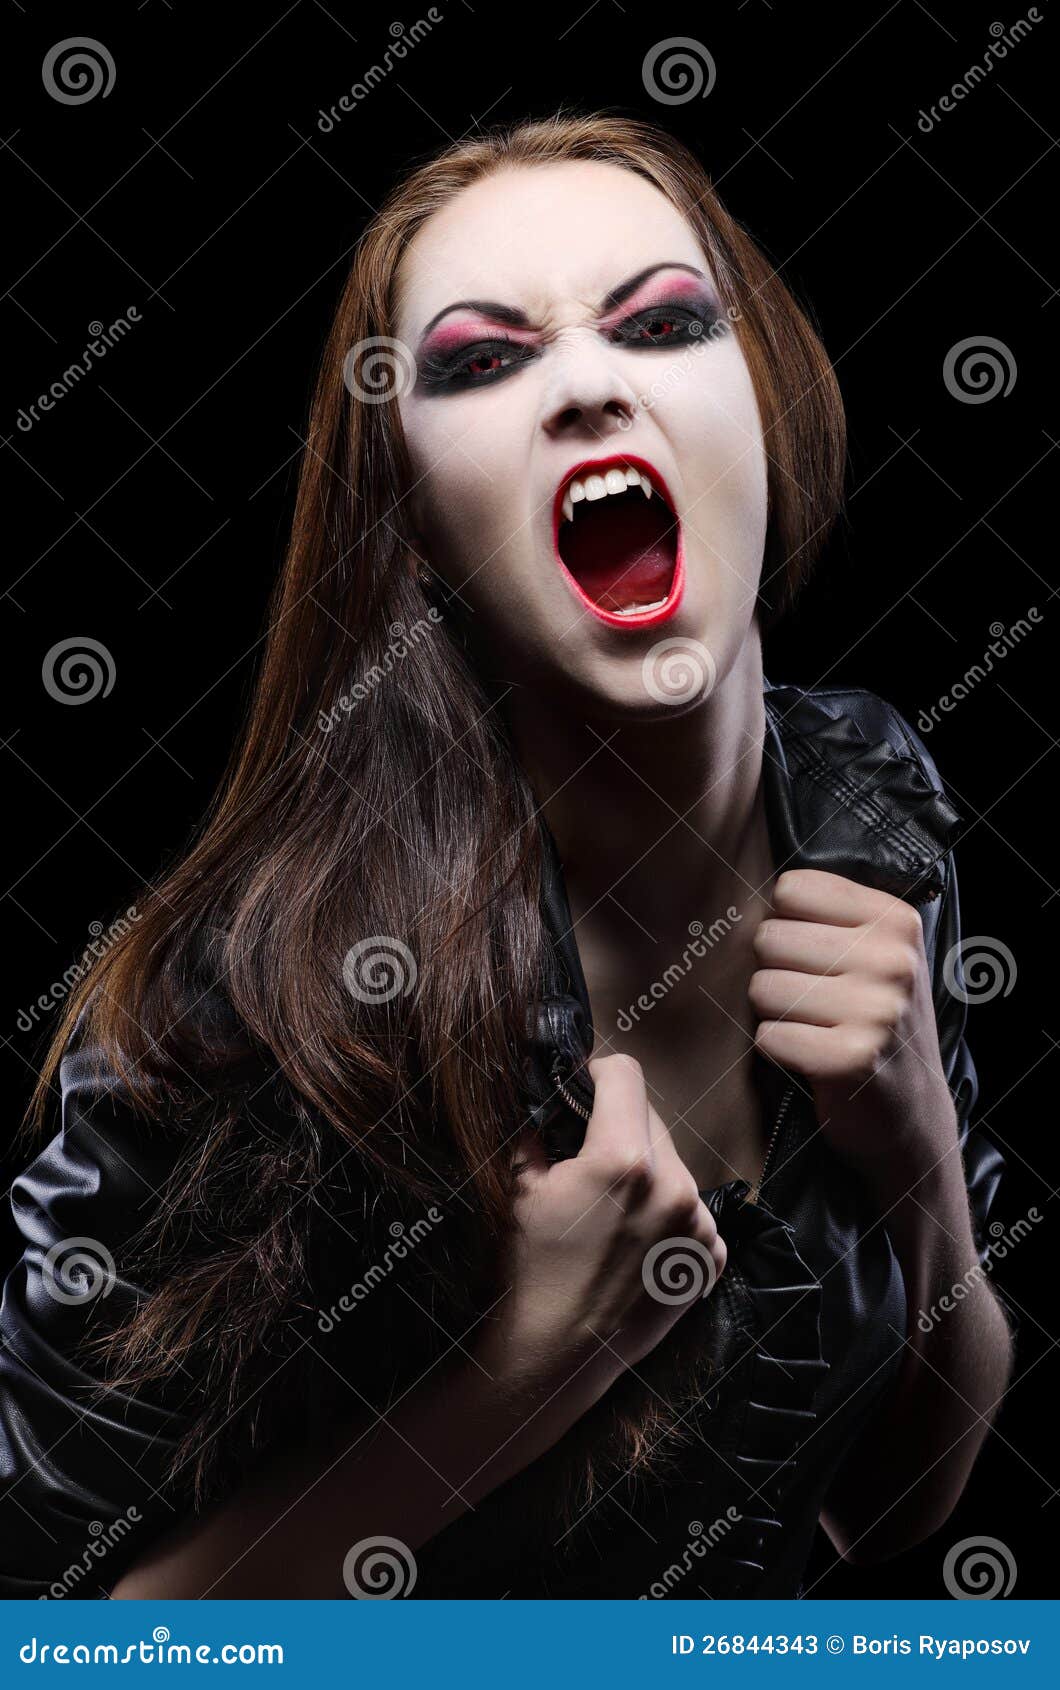 Young Beautiful Vampire Woman Stock Image - Image of anger, attractive ...